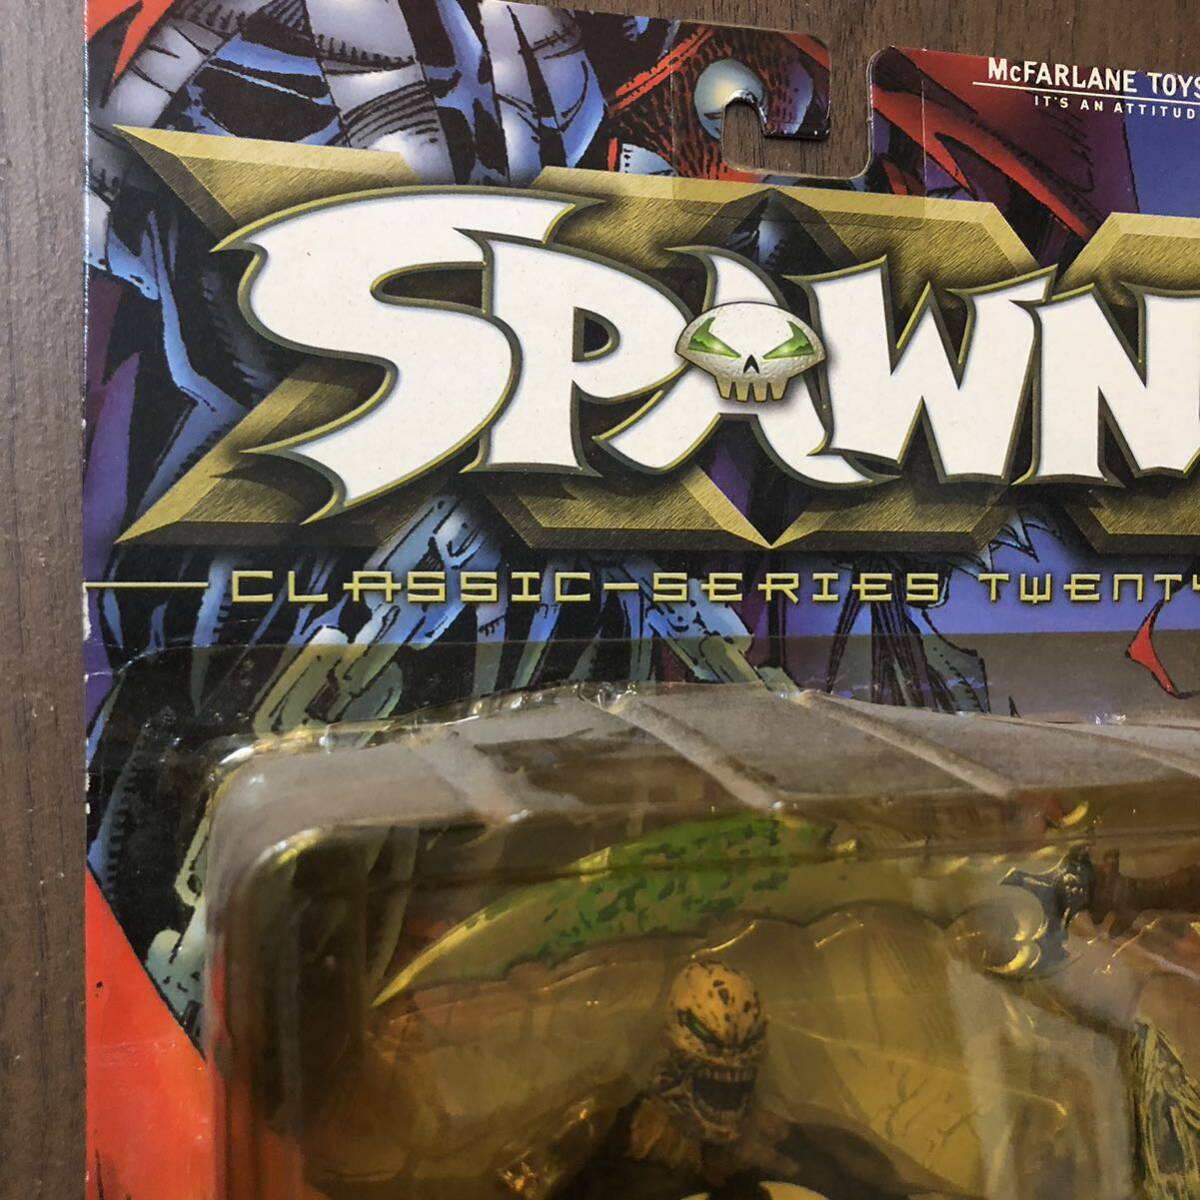 Spawn VI Classic Series 20 Masked フィギュア McFarlane Toys Action Figure マクファーレントイズ スポーン 箱付き アメコミ_画像2